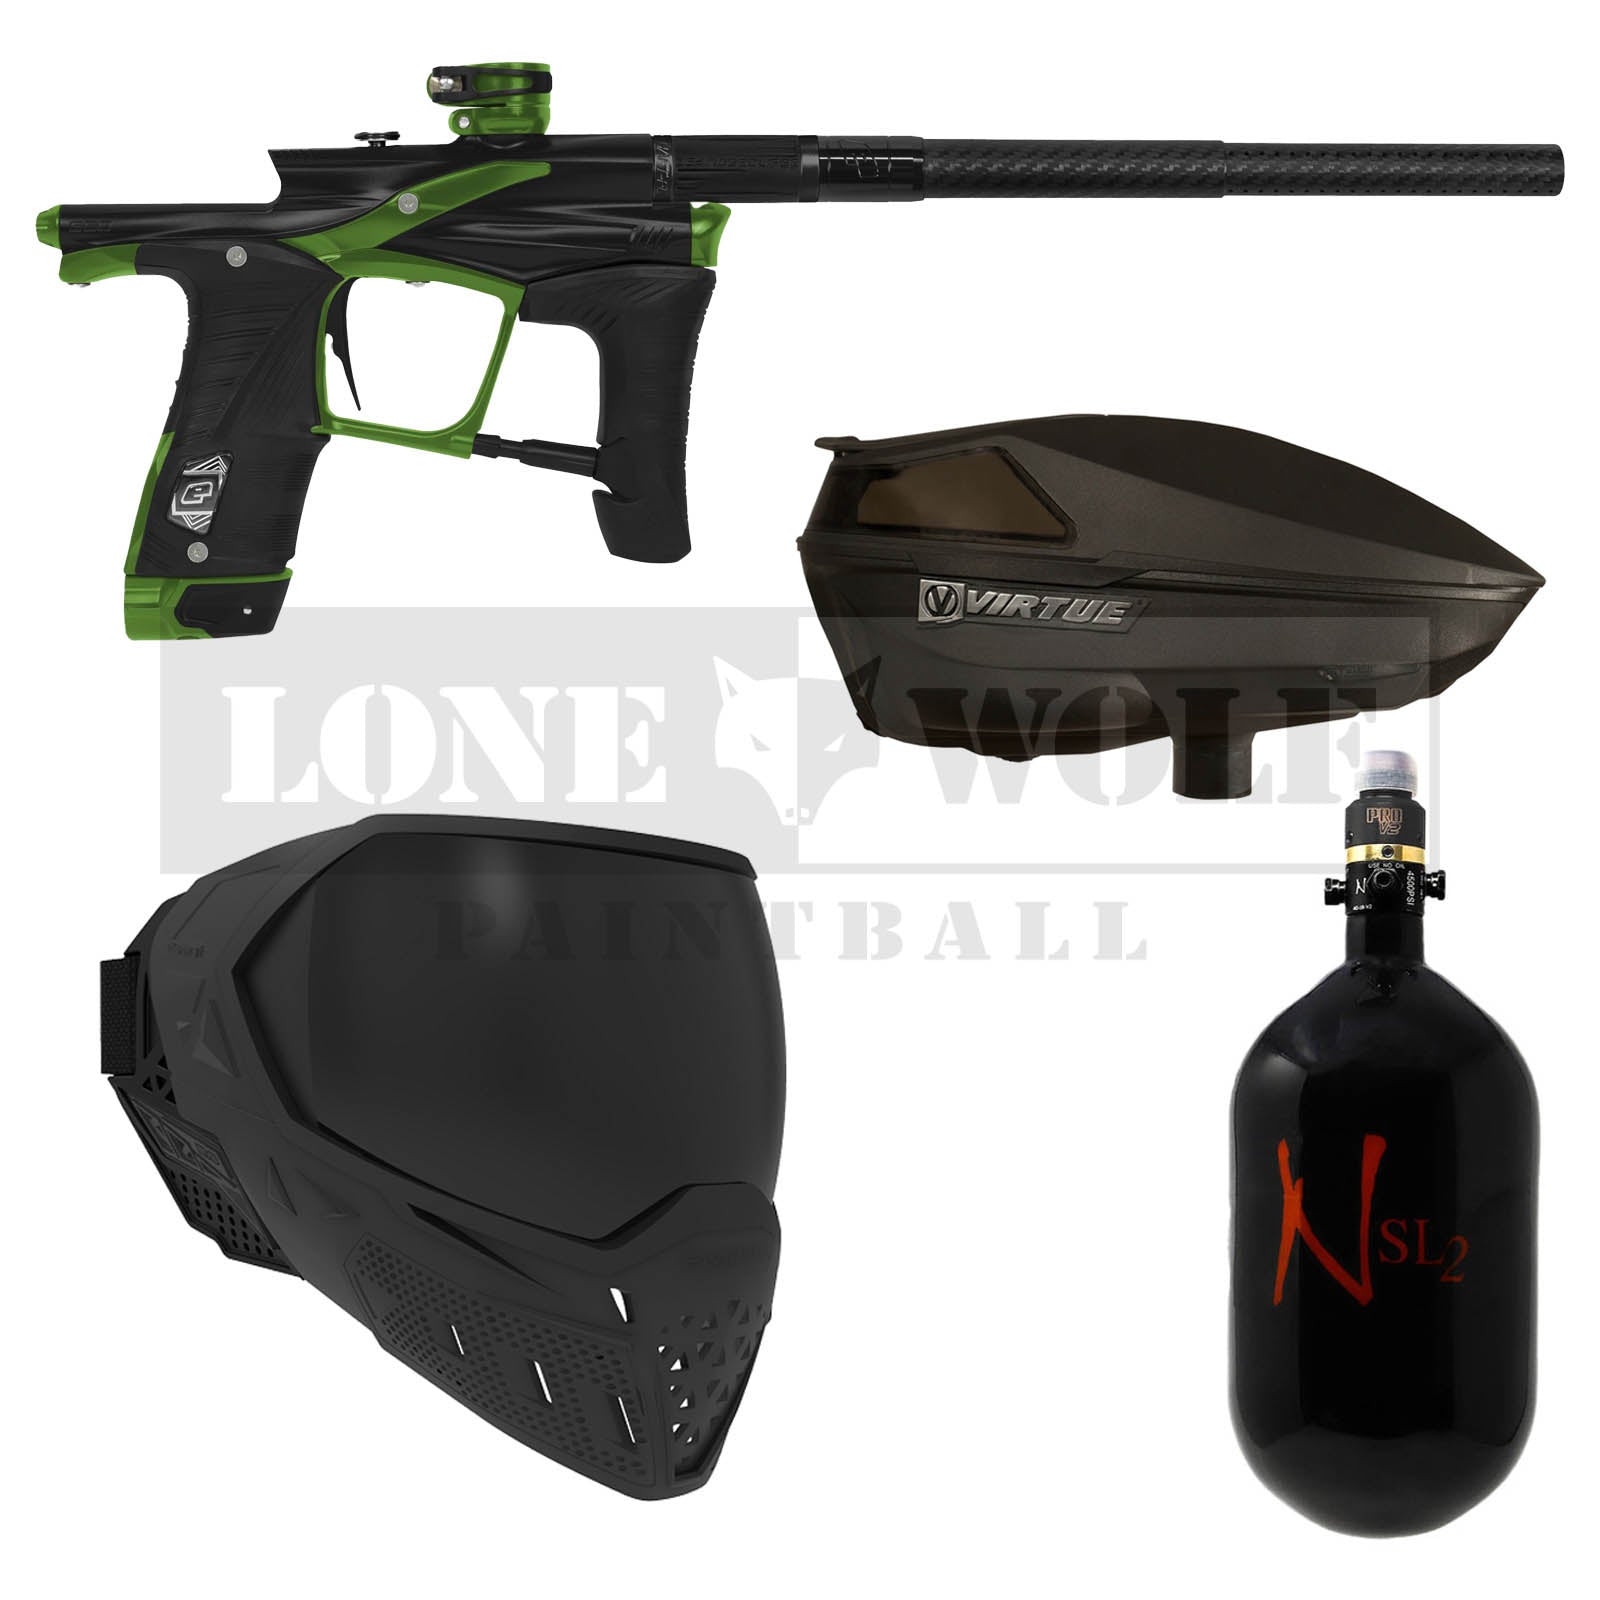 Planet Eclipse Ego LV1.6 Markers – Lone Wolf Paintball